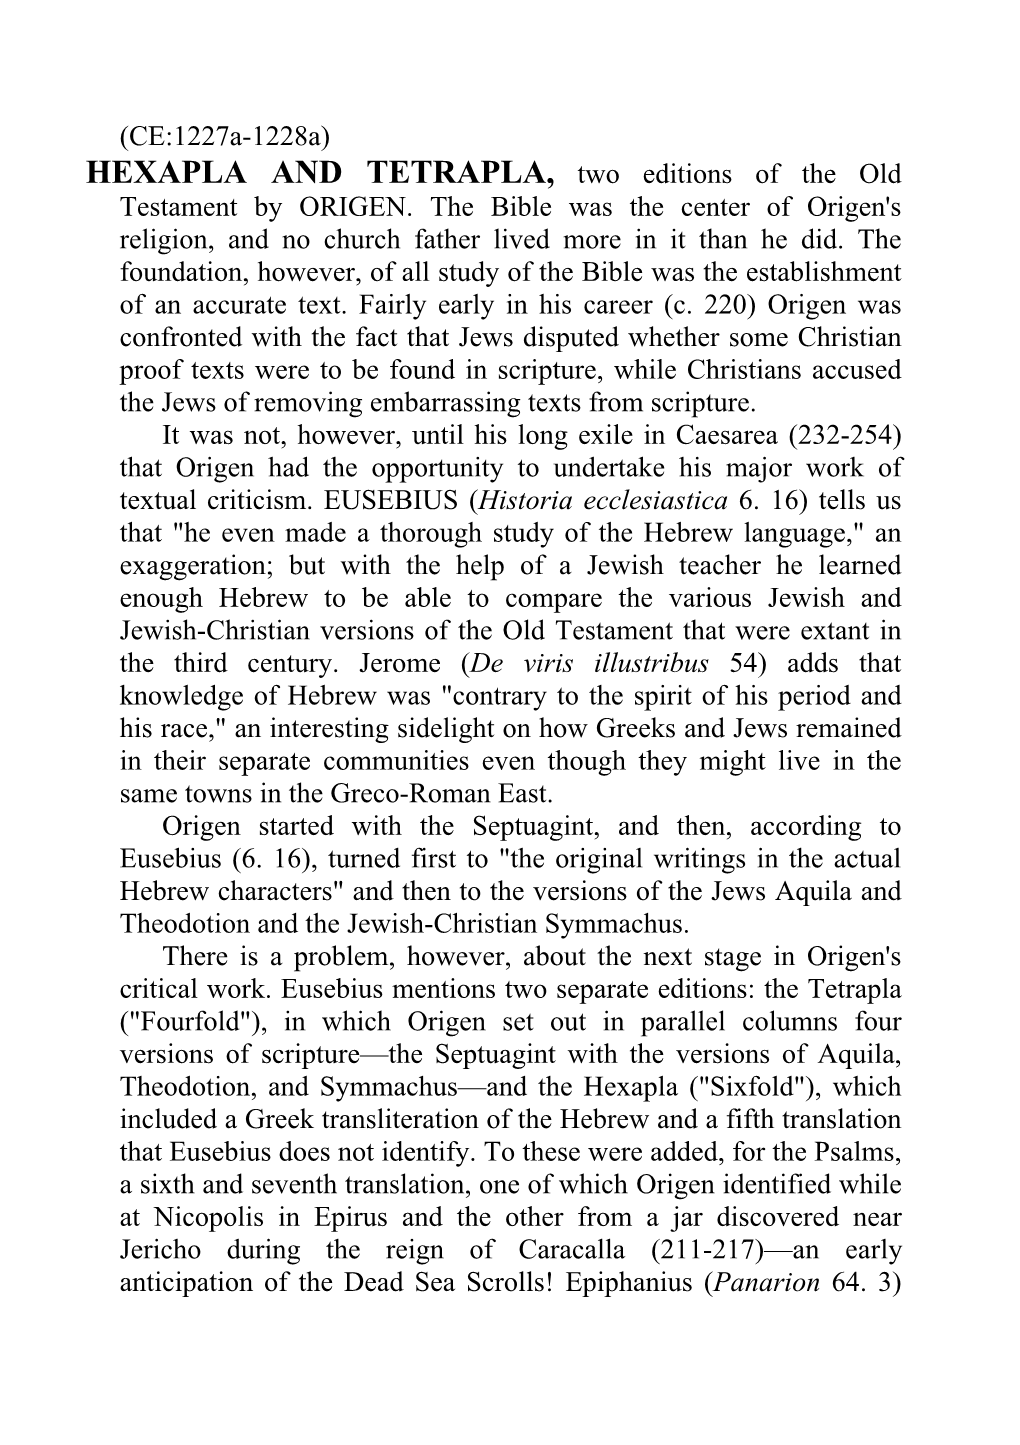 (CE:1227A-1228A) HEXAPLA and TETRAPLA, Two Editions of the Old Testament by ORIGEN